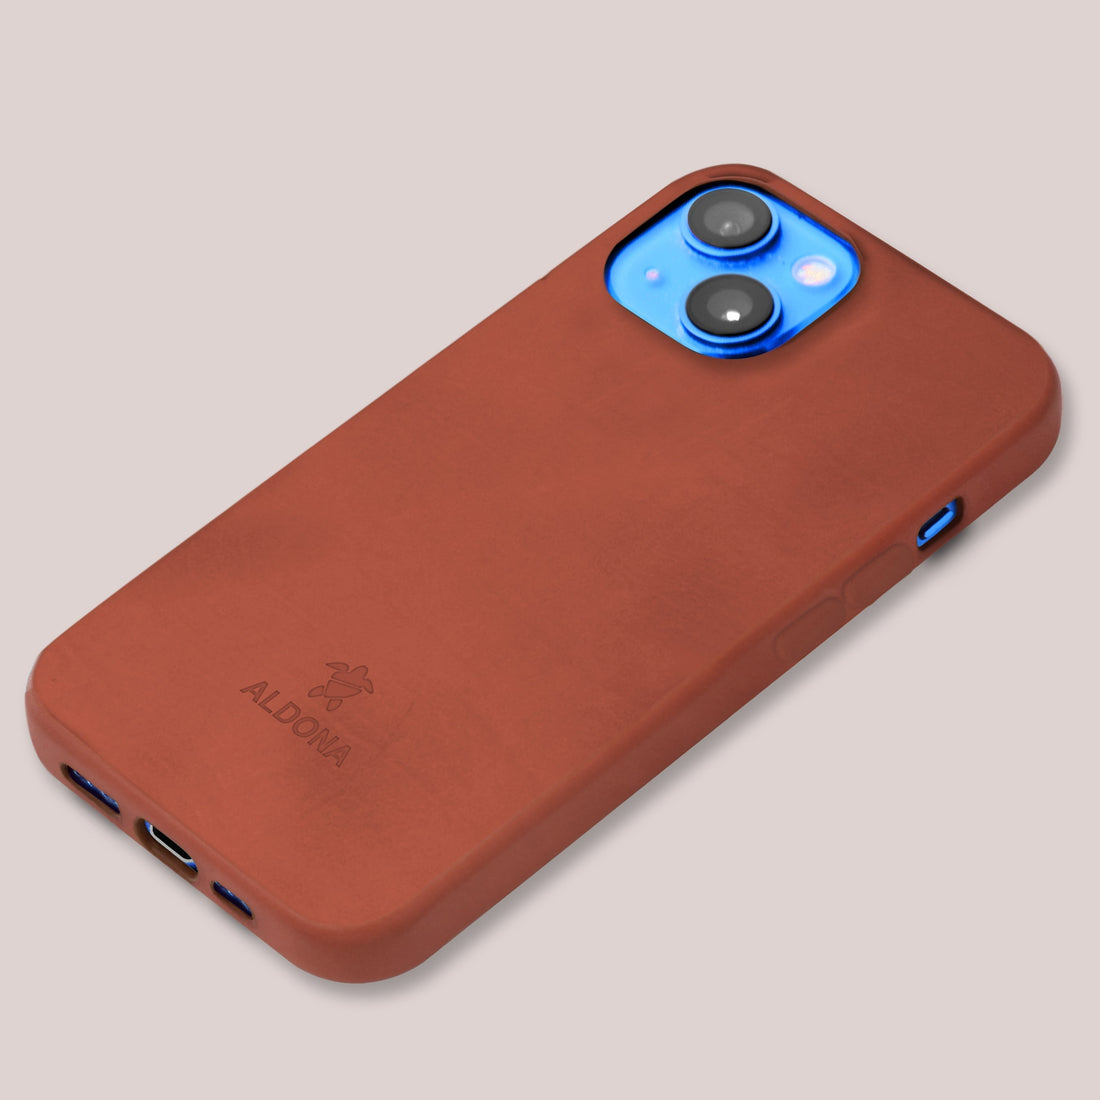 Kalon Case for iPhone 13 Mini with MagSafe Compatibility - Burnt Tobacco